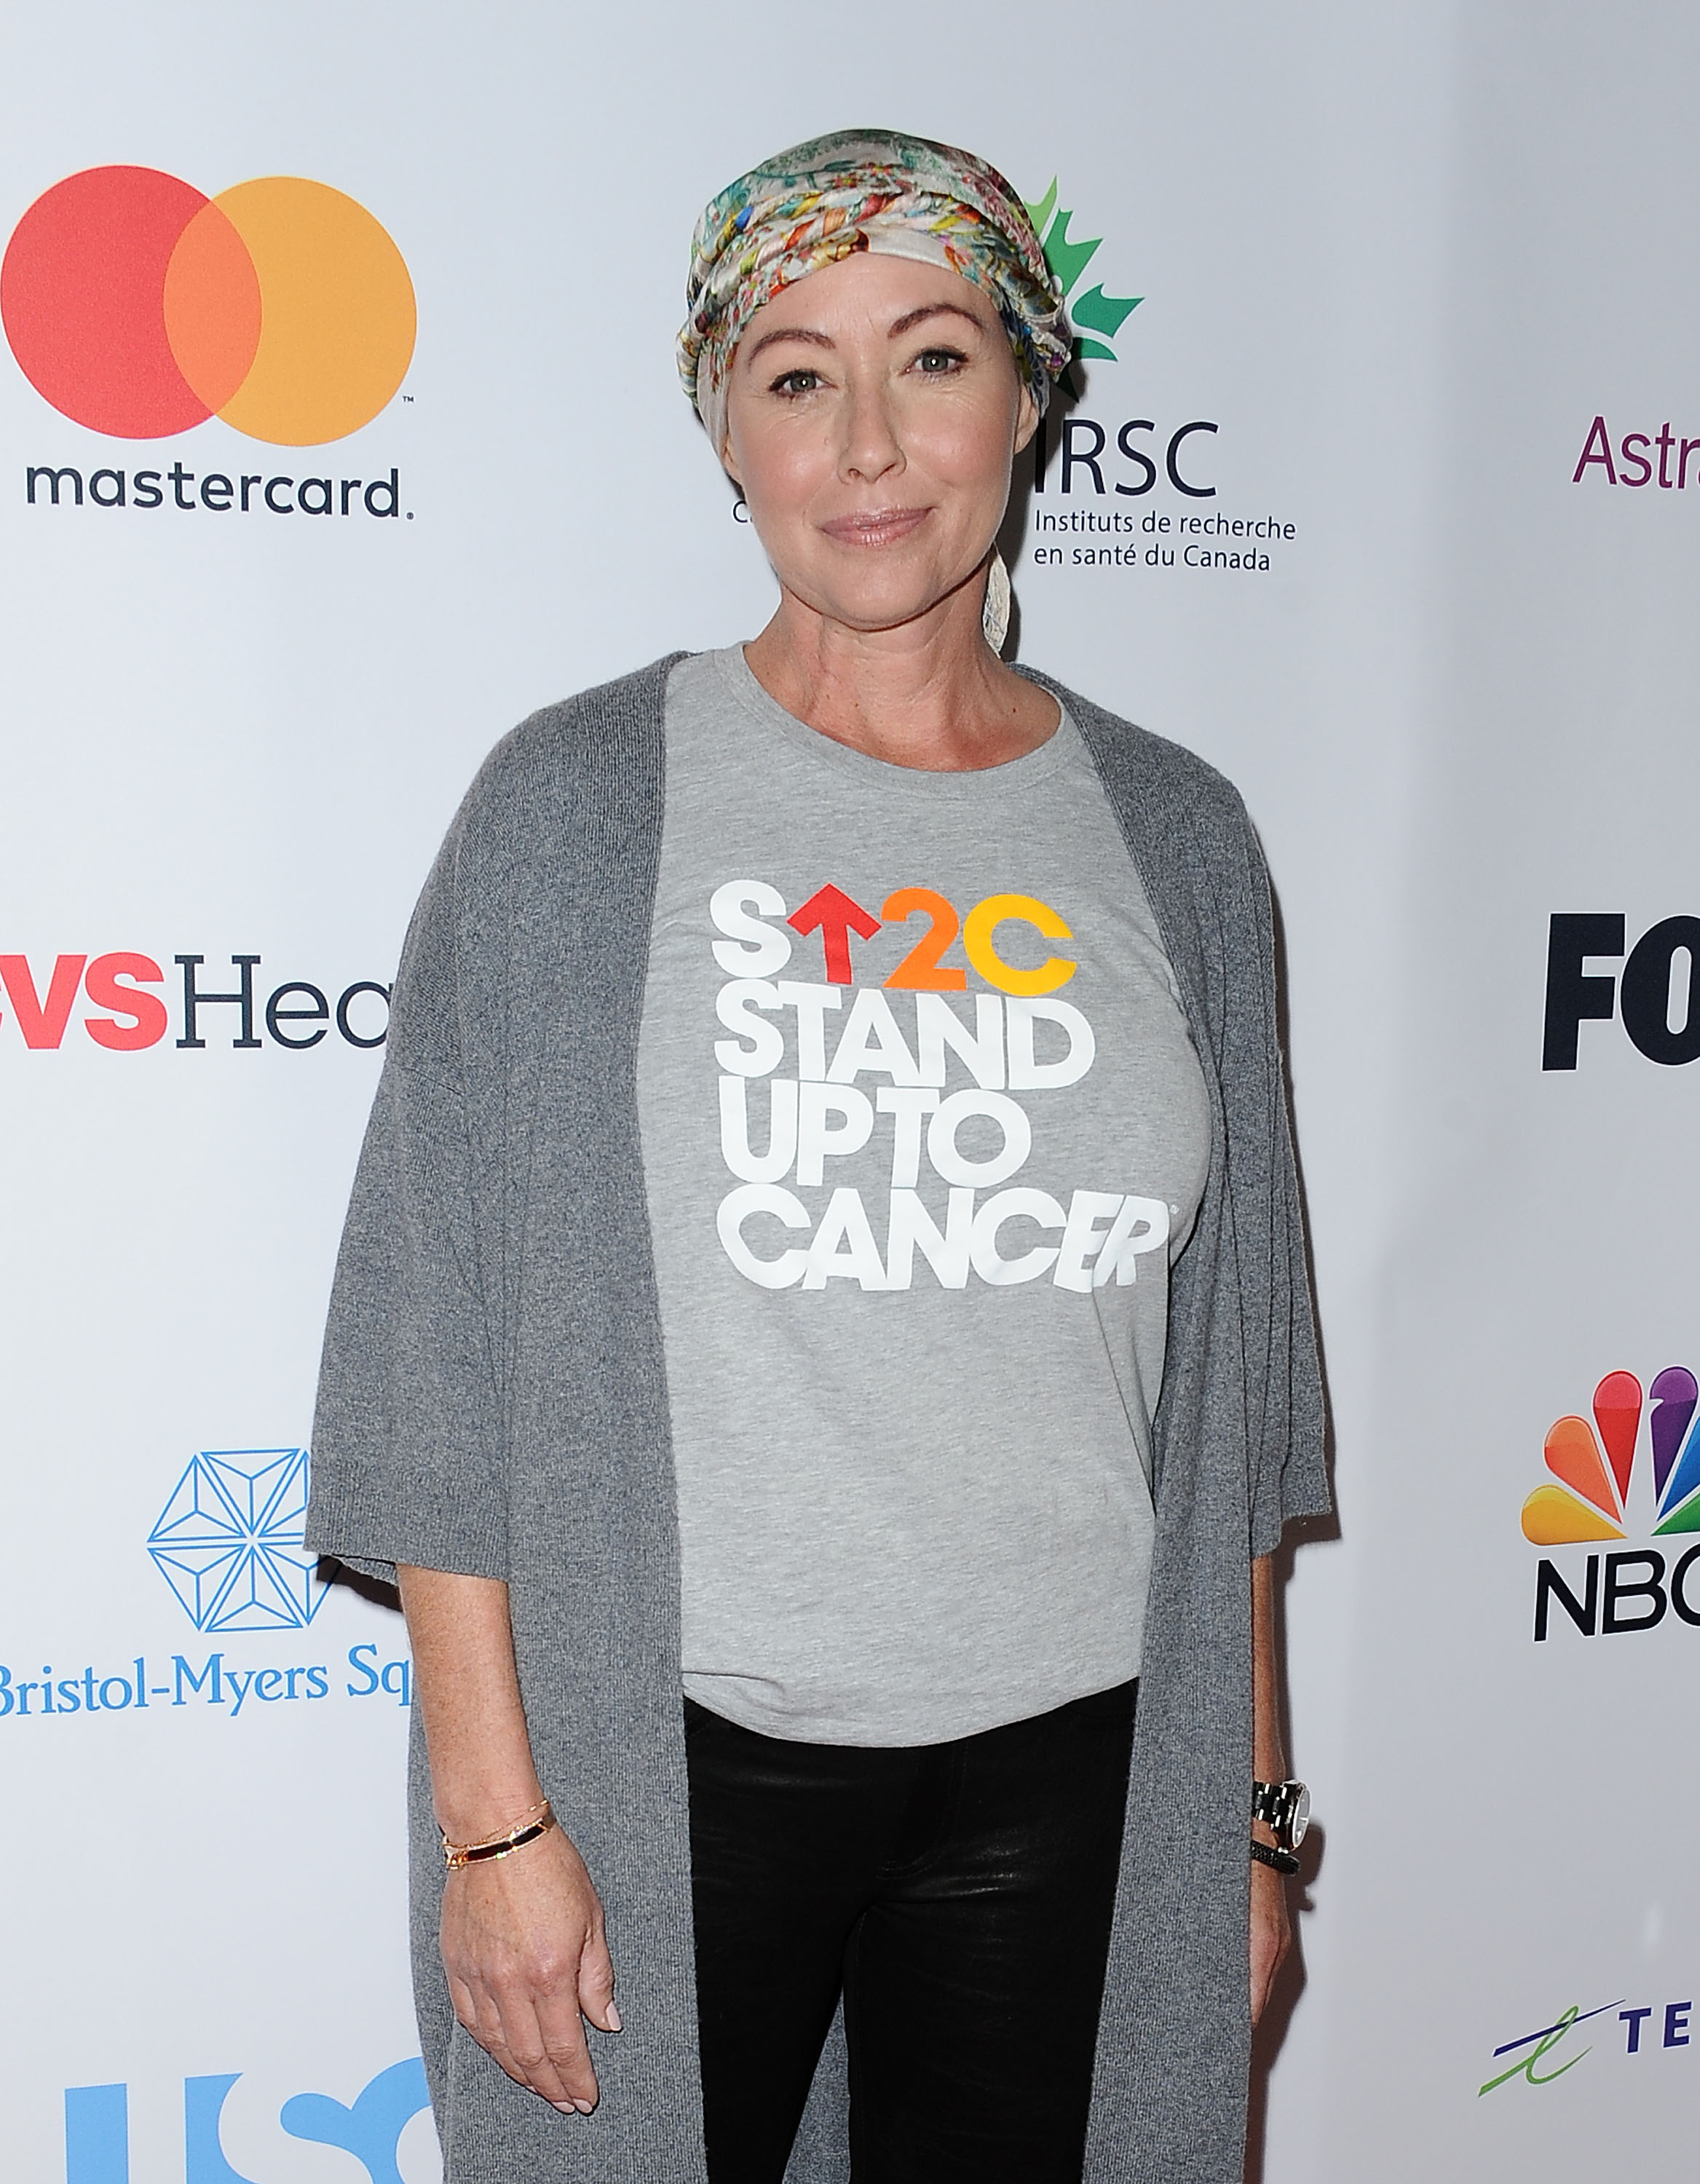 Shannen Doherty at the  5th Biennial "Stand Up To Cancer" event in Los Angeles, California on September 9, 2016 | Source: Getty Images